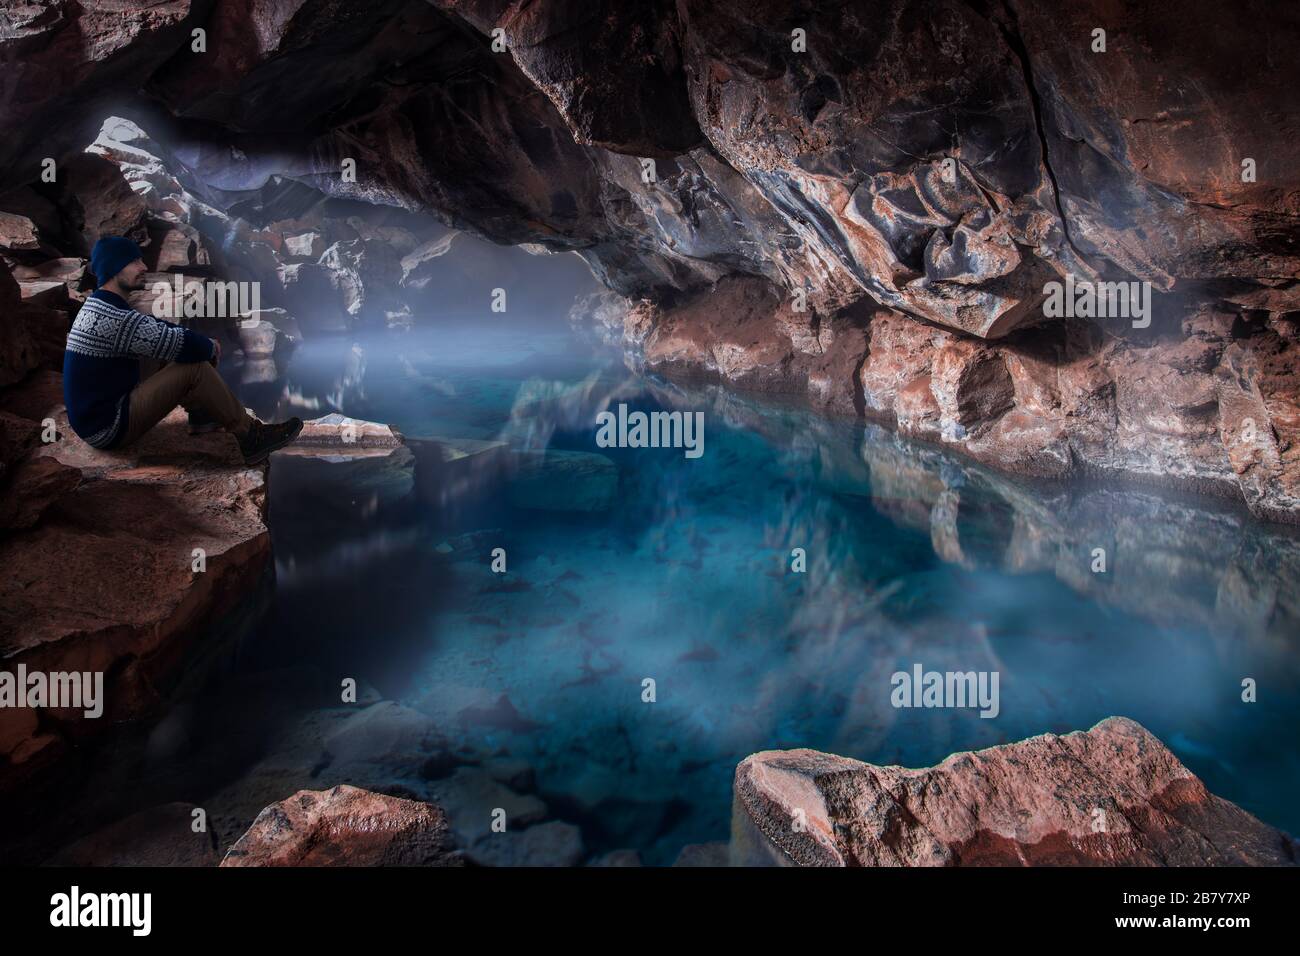 man in traditional Icelandic woolen sweater sitting by beautiful turquoise clear geothermal pool with mist on top inside volcanic cave in Grjotagja, I Stock Photo